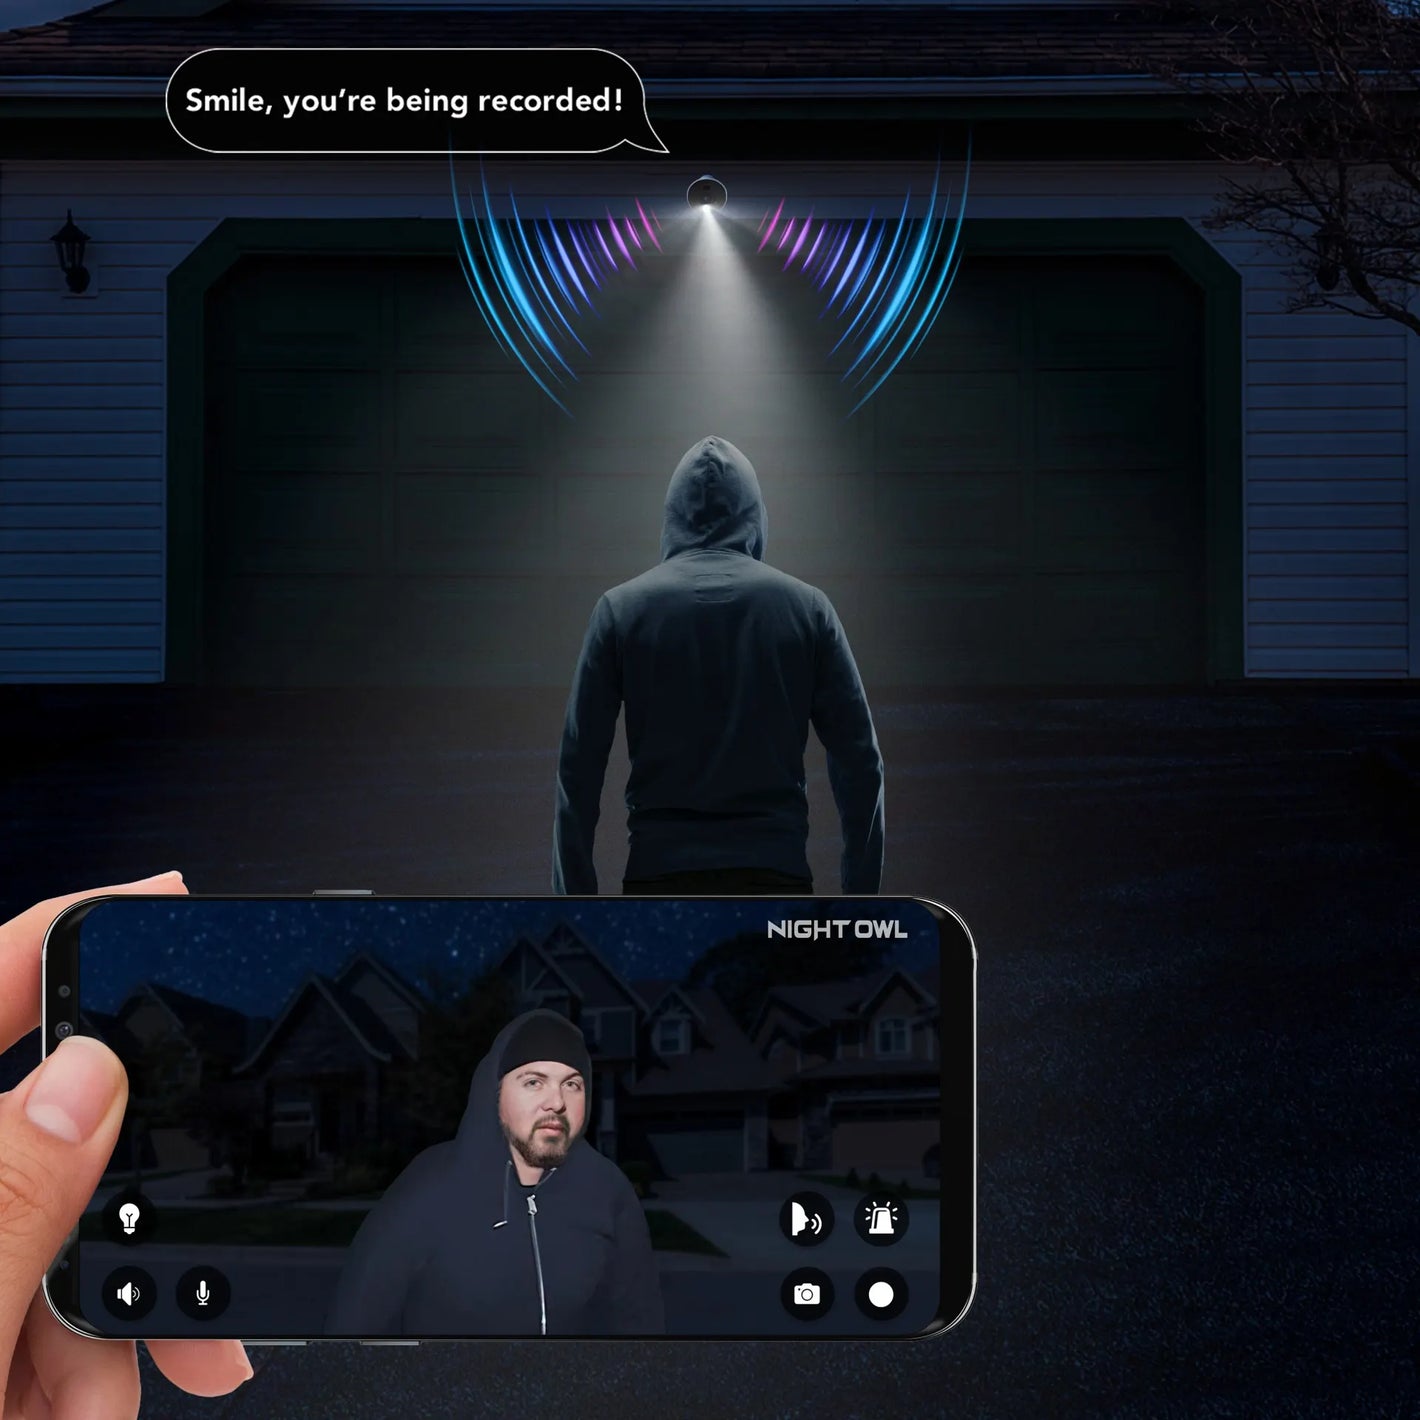 Security system with spotlight on recording a stranger in a hood outside the house